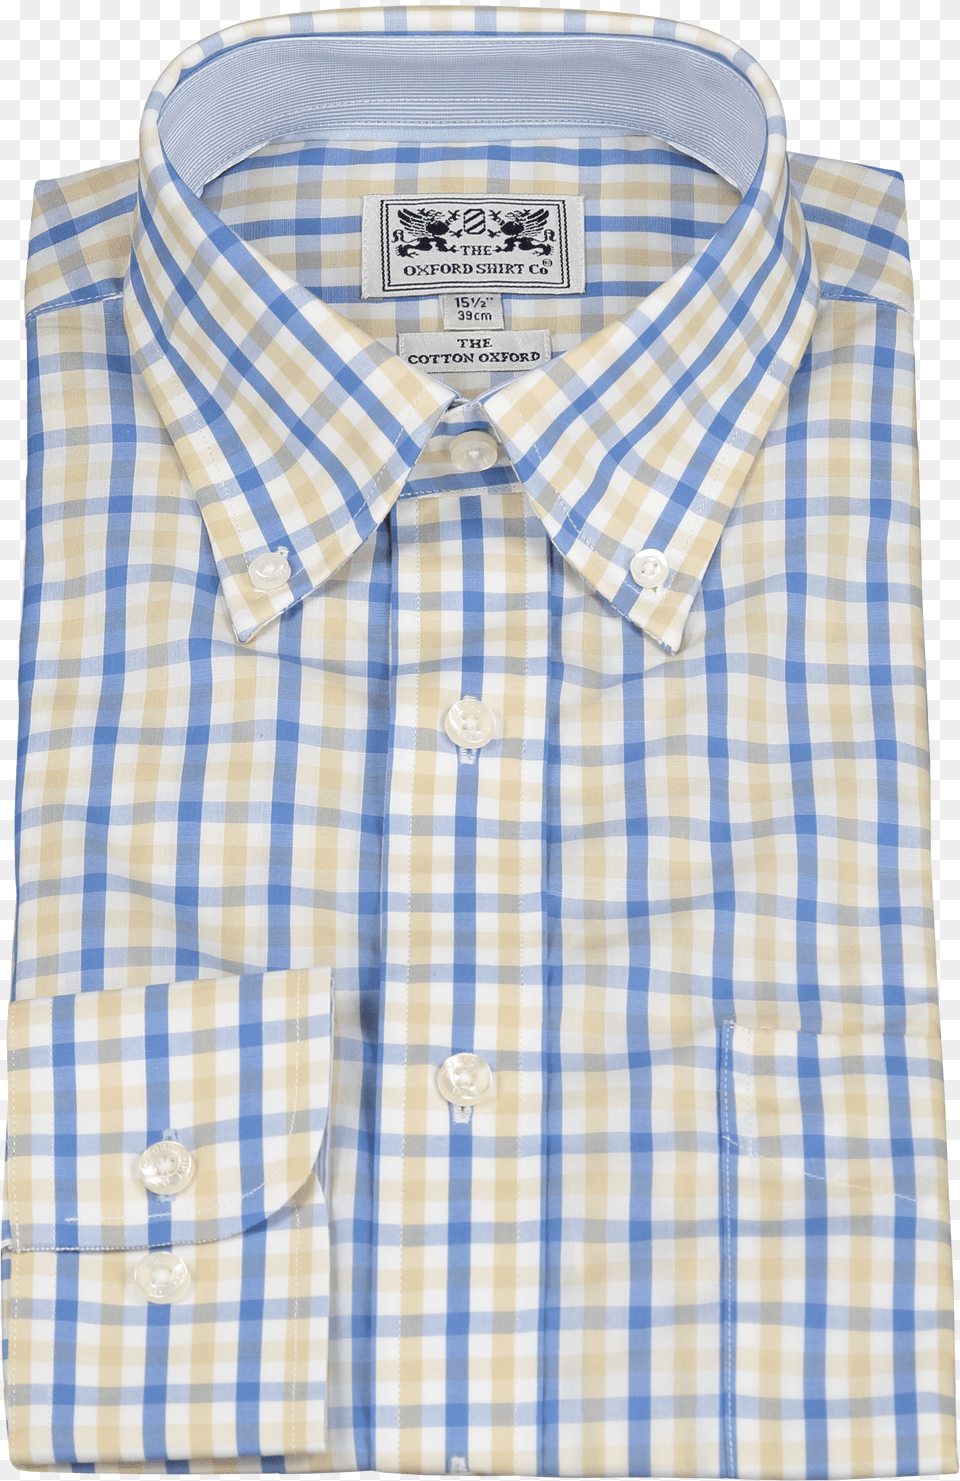 Button Down Shirt In Gold And Blue Check Minot39s Ledge Light Free Png